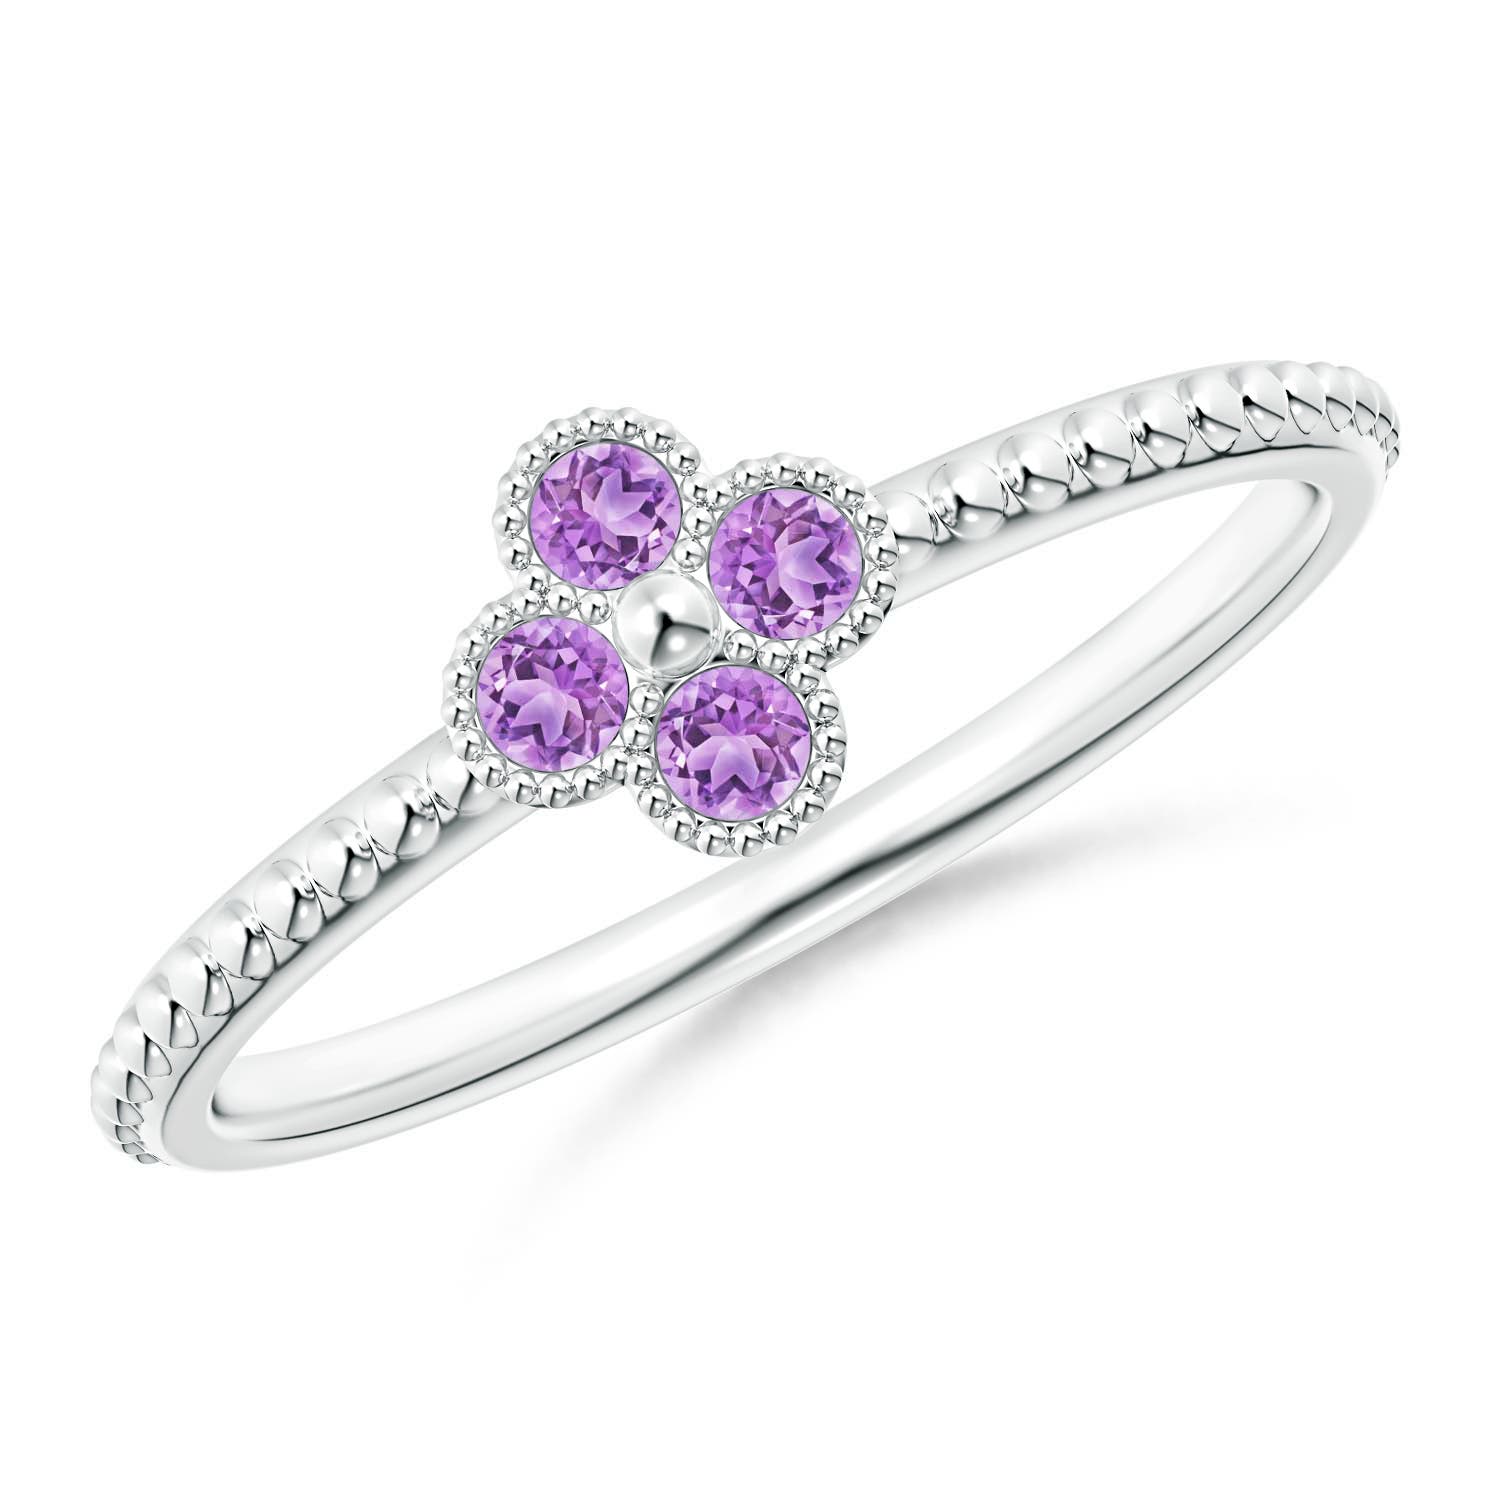 AAA - Amethyst / 0.12 CT / 14 KT White Gold